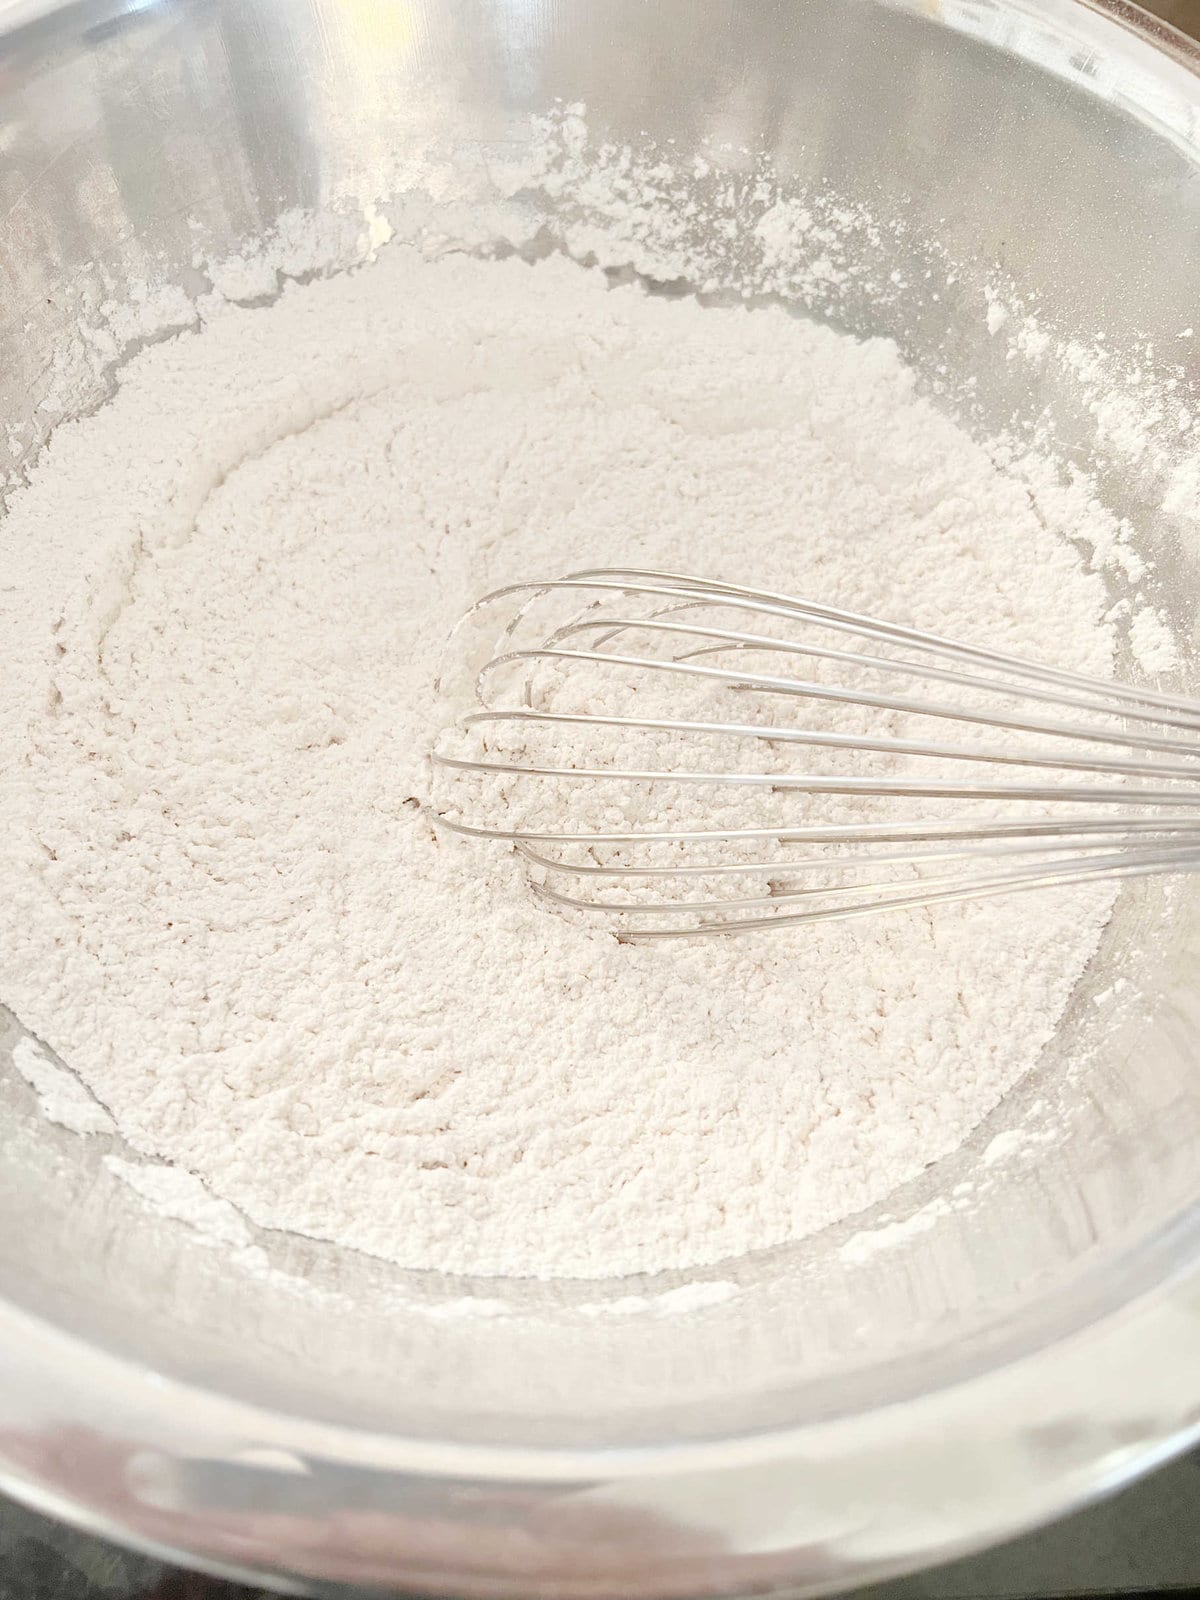 Mixture of Dry Ingredients with whisk